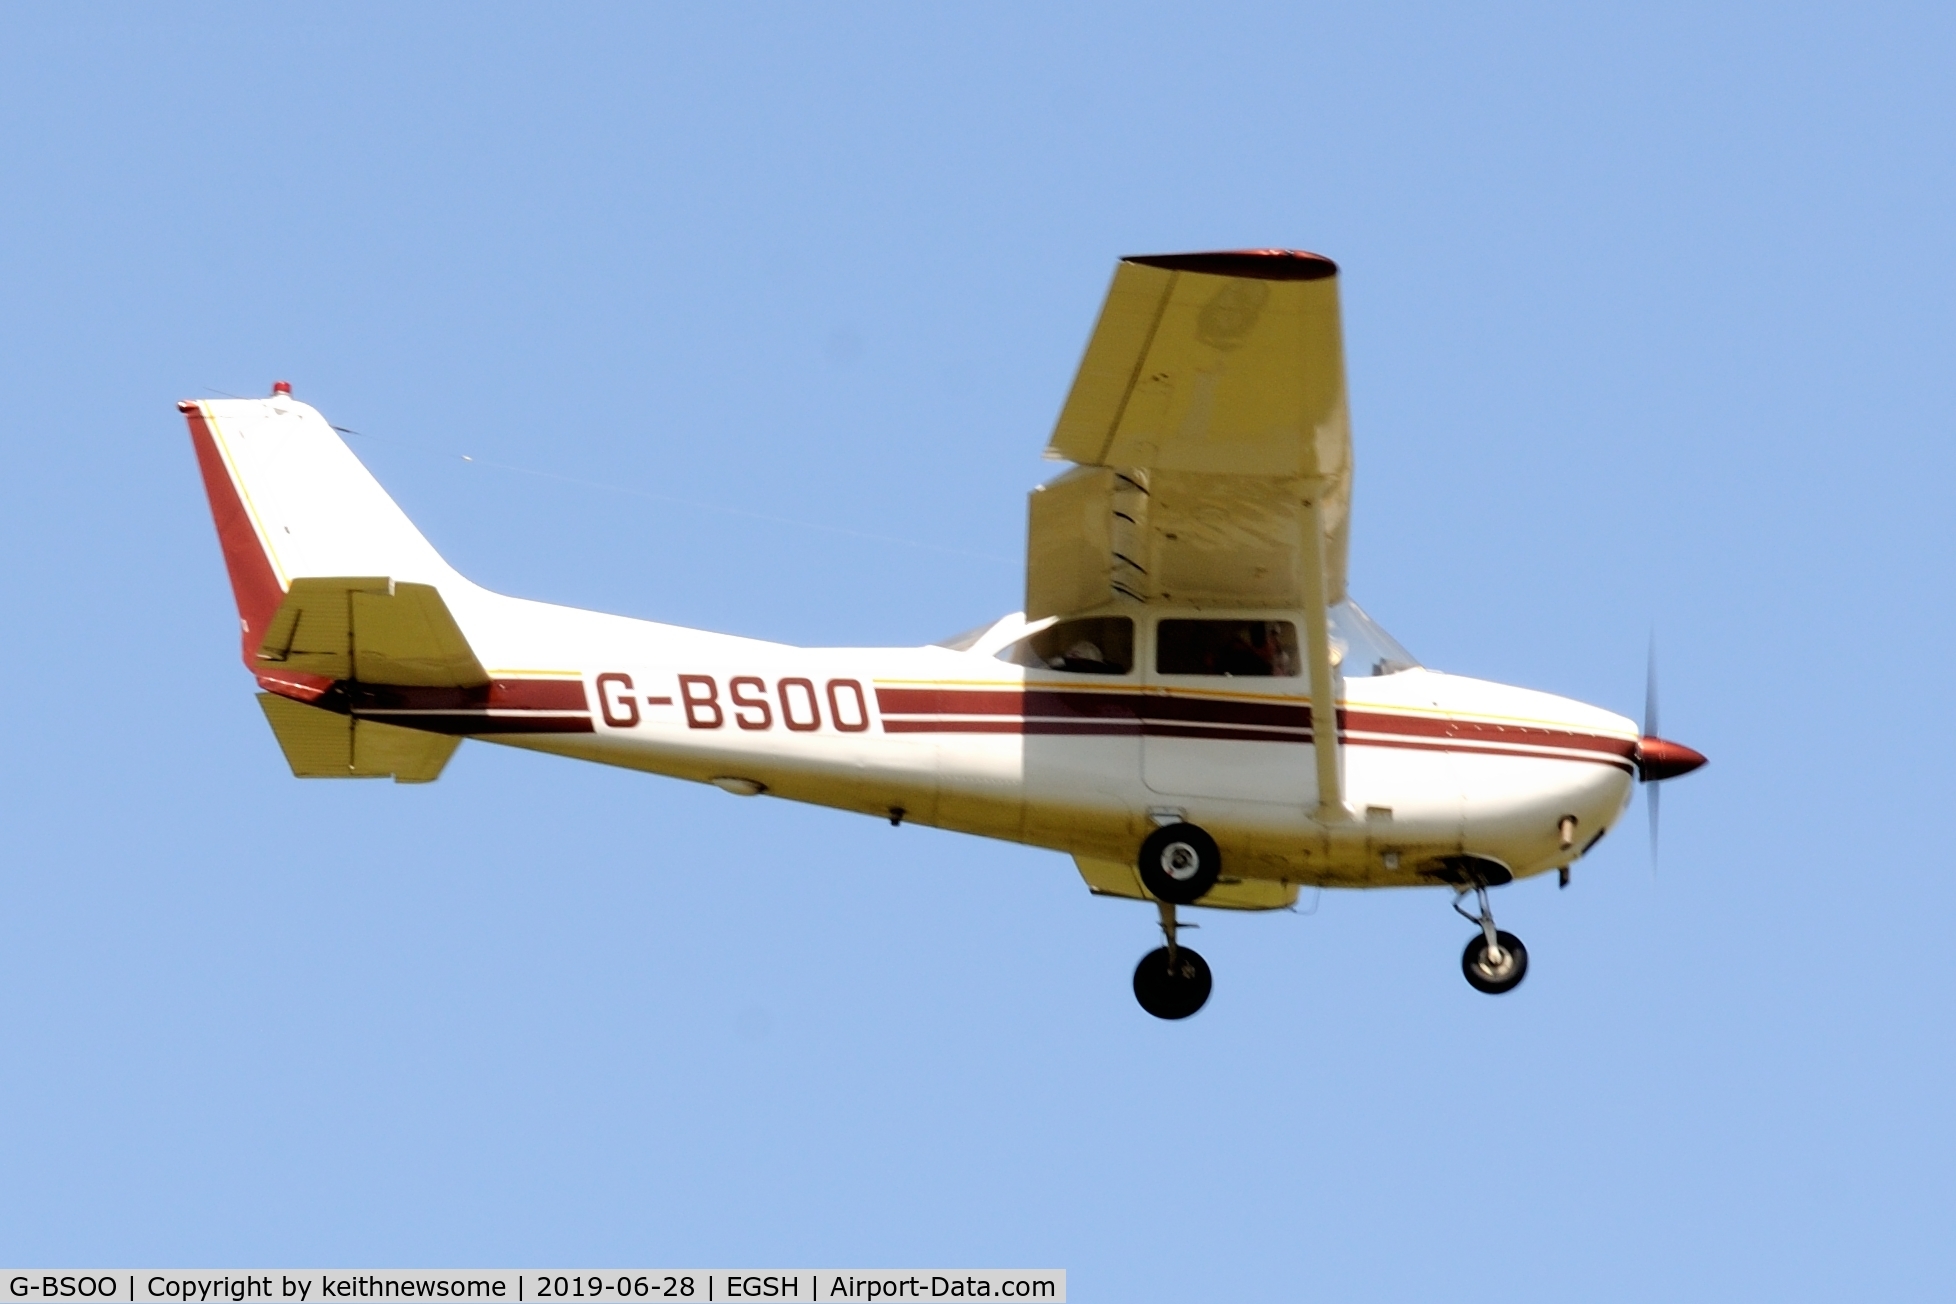 G-BSOO, 1964 Cessna 172F C/N 172-52431, Diverting to Norwich with minor engine problem.